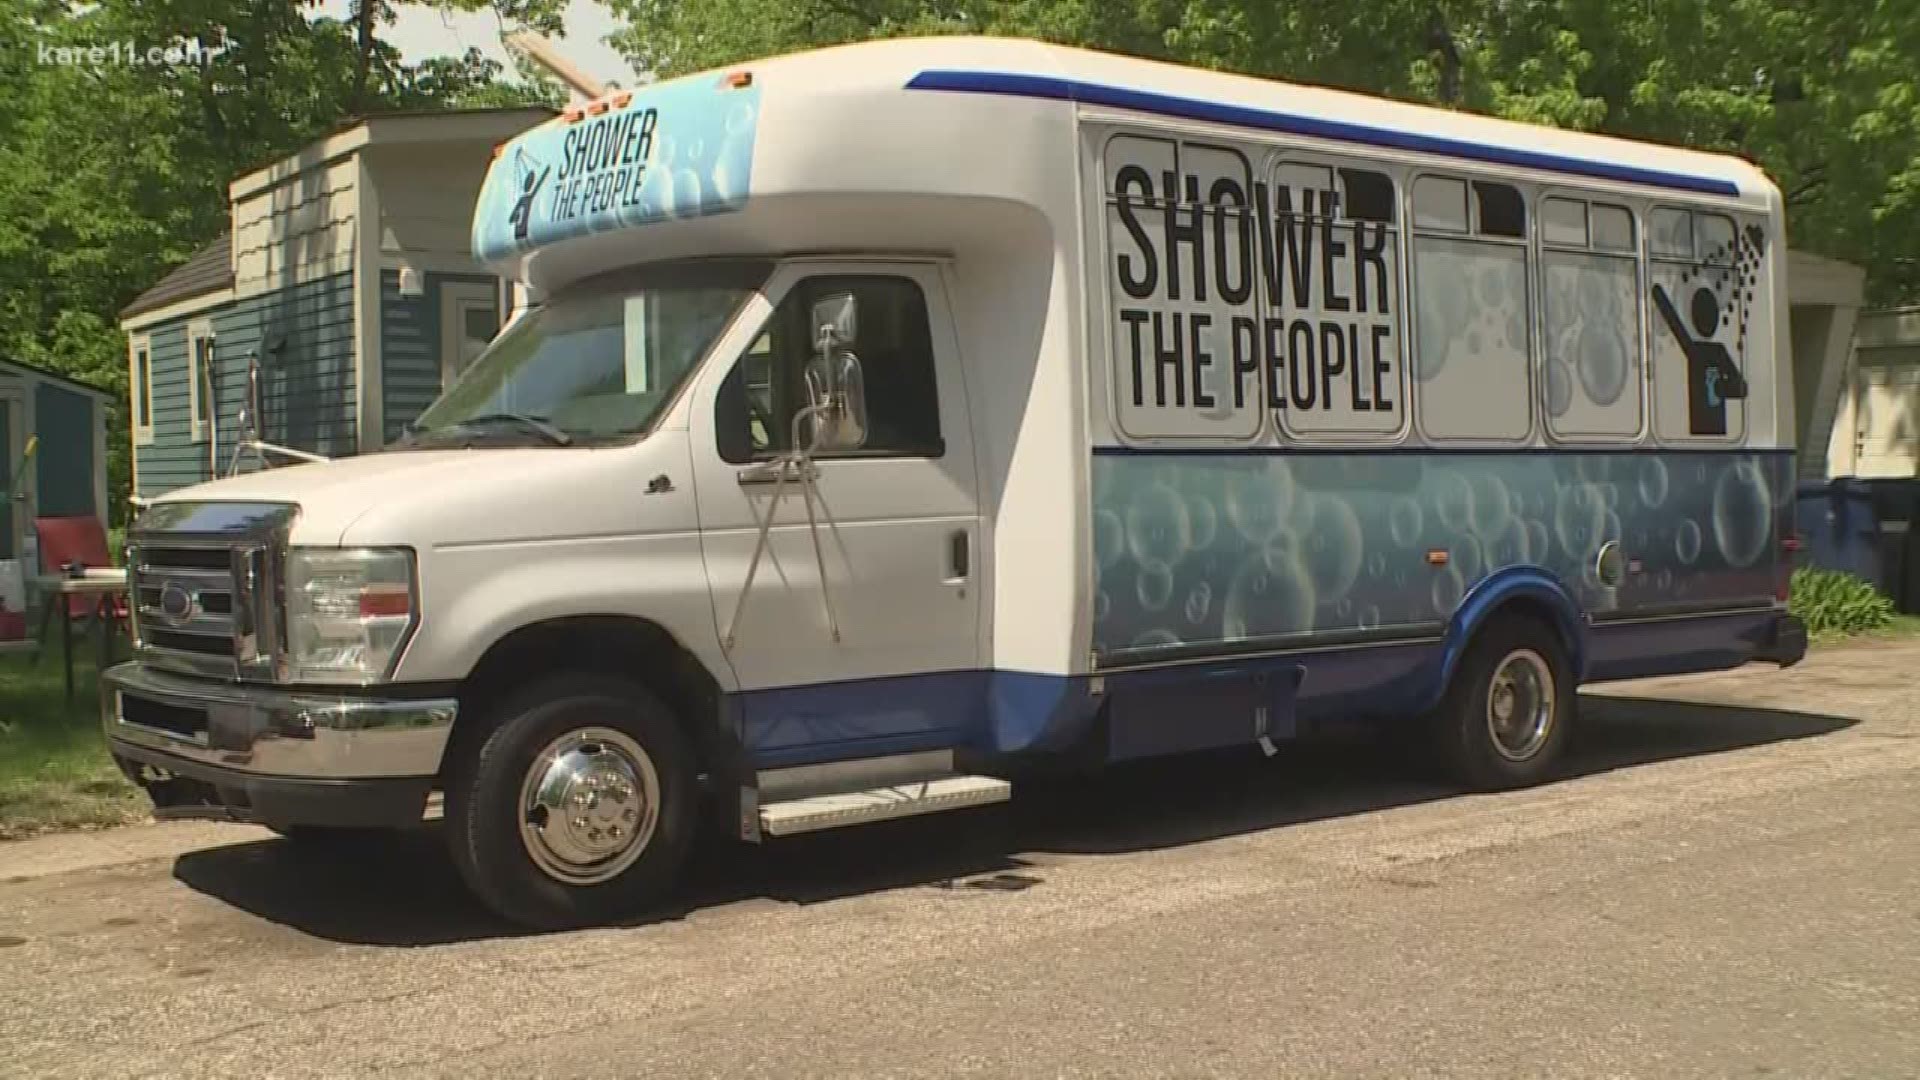 The couple plans to launch the mobile shower later this week providing free showers for those throughout the St. Cloud area.